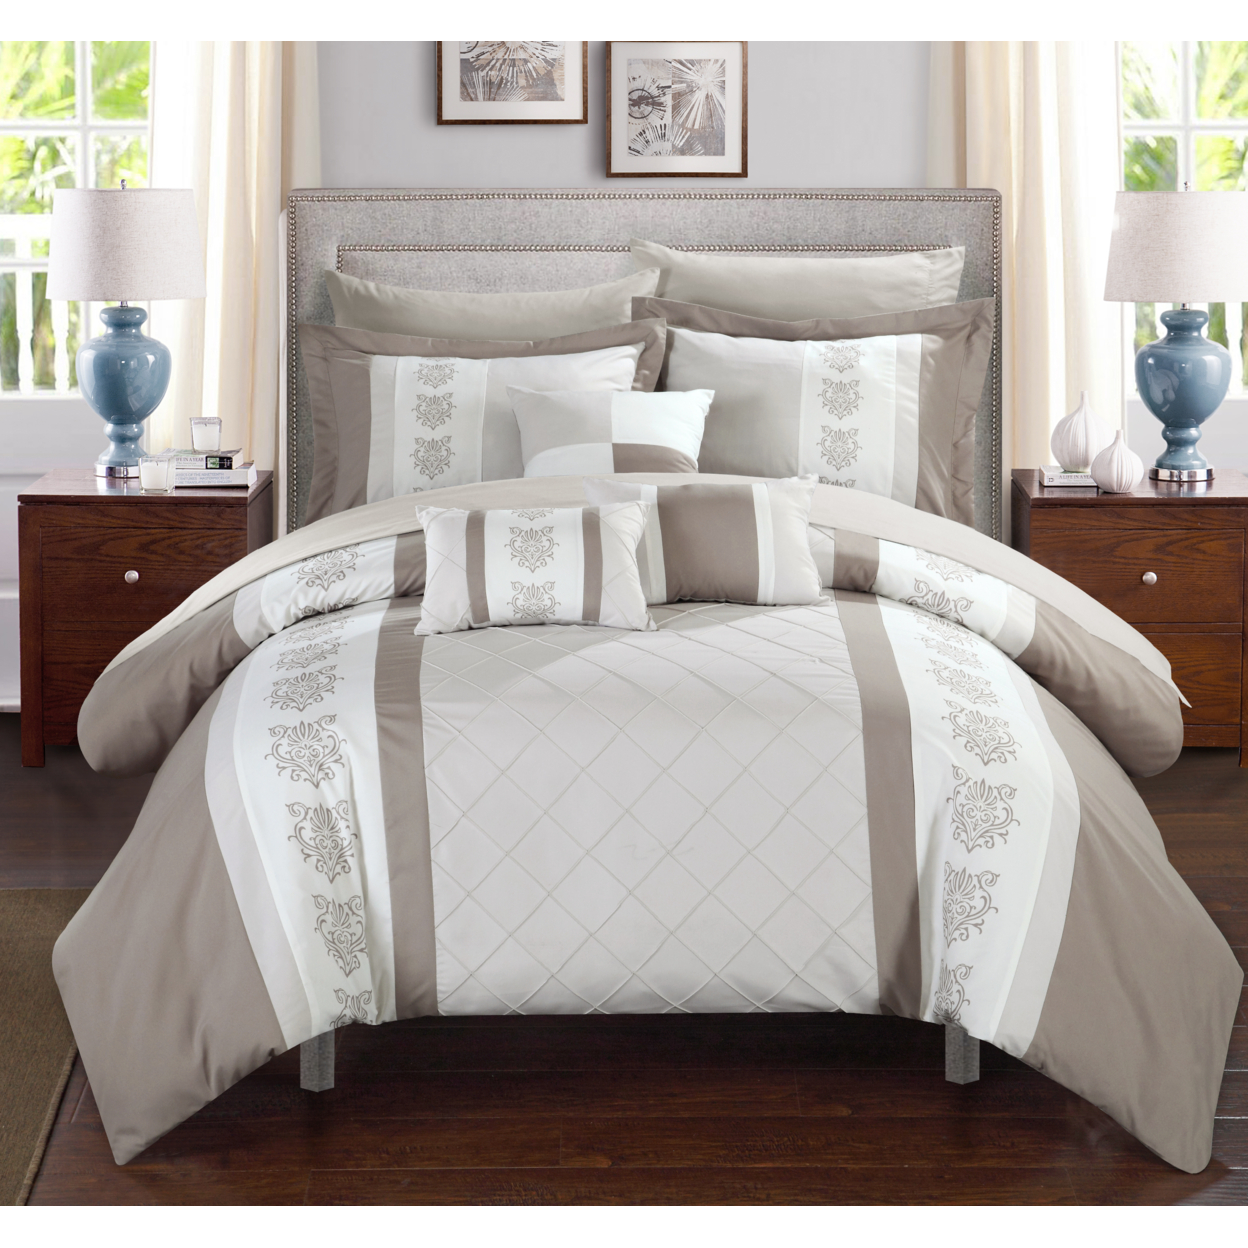 Chic Home 8/10 Piece Adam Pintuck Pieced Color Block Embroidery Bed In A Bag Comforter Set With Sheet Set - Beige, King